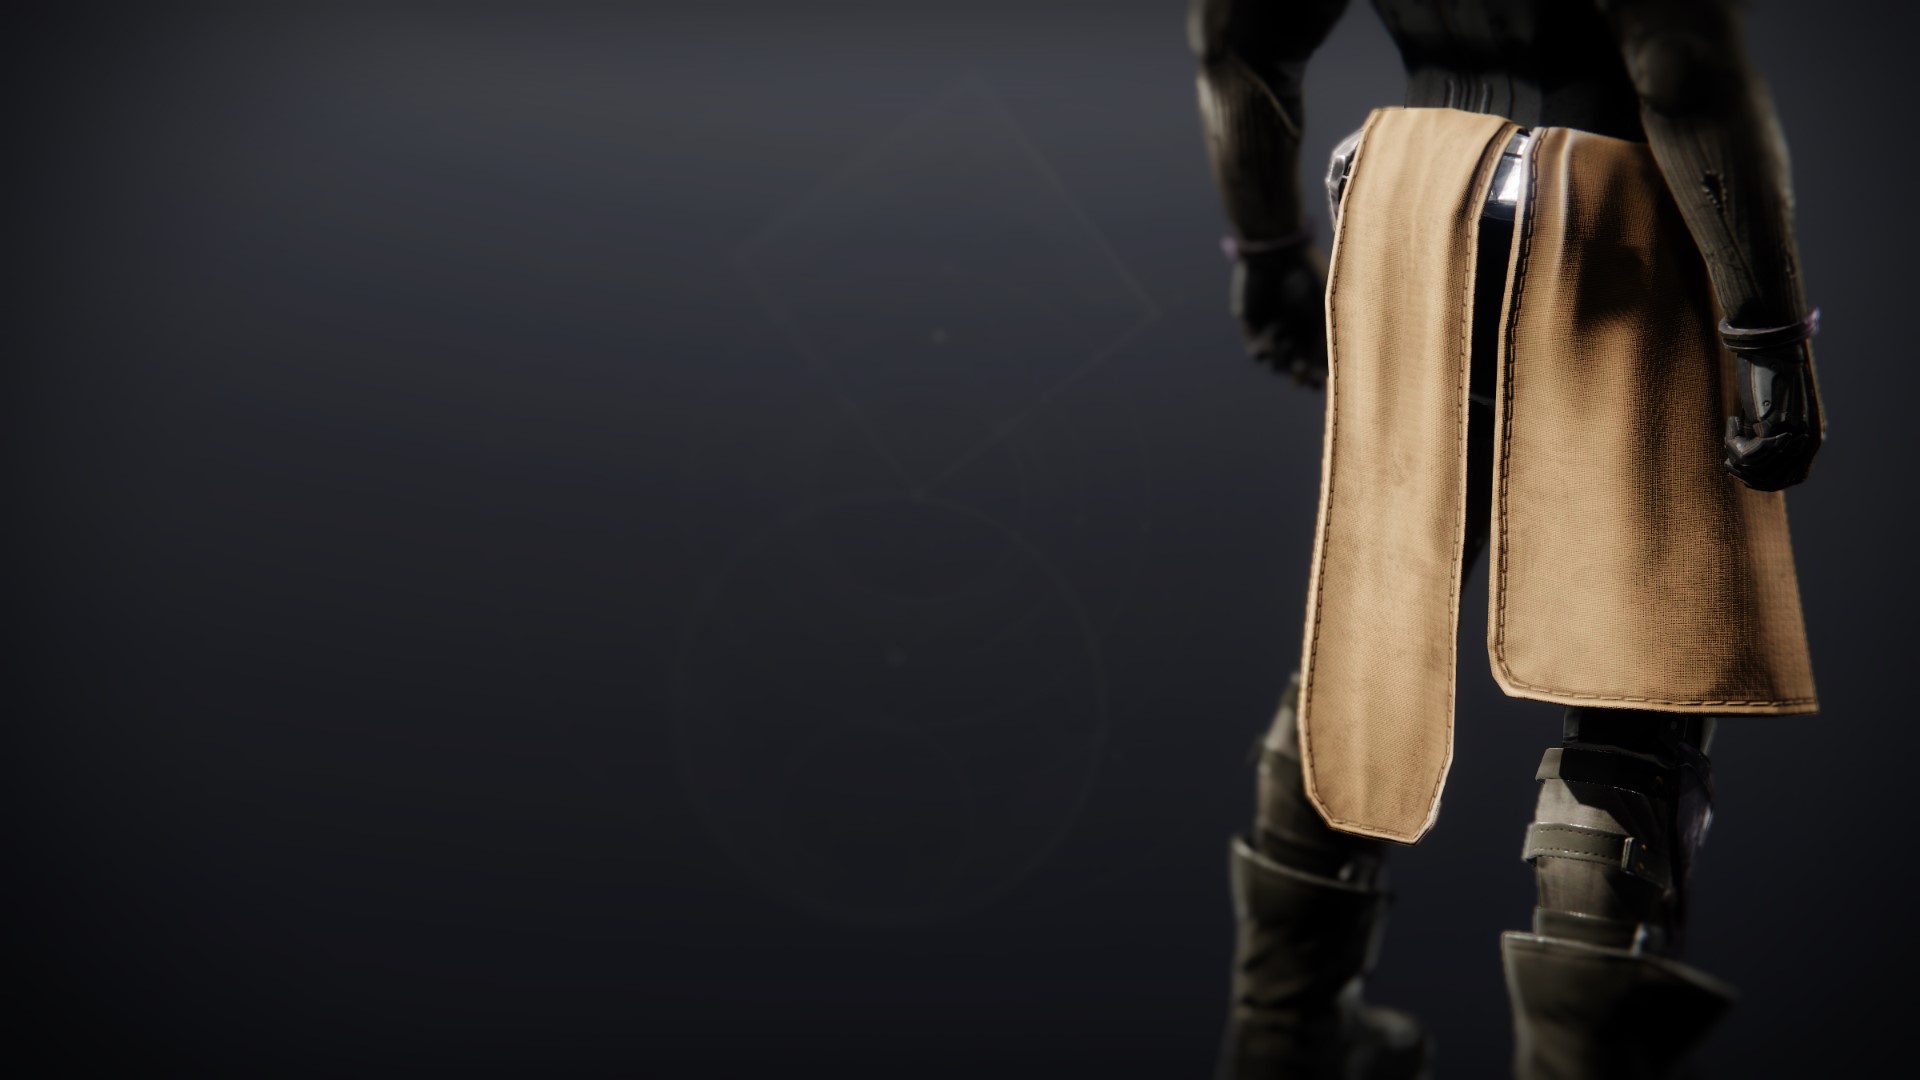 An in-game render of the Wild Hunt Mark.